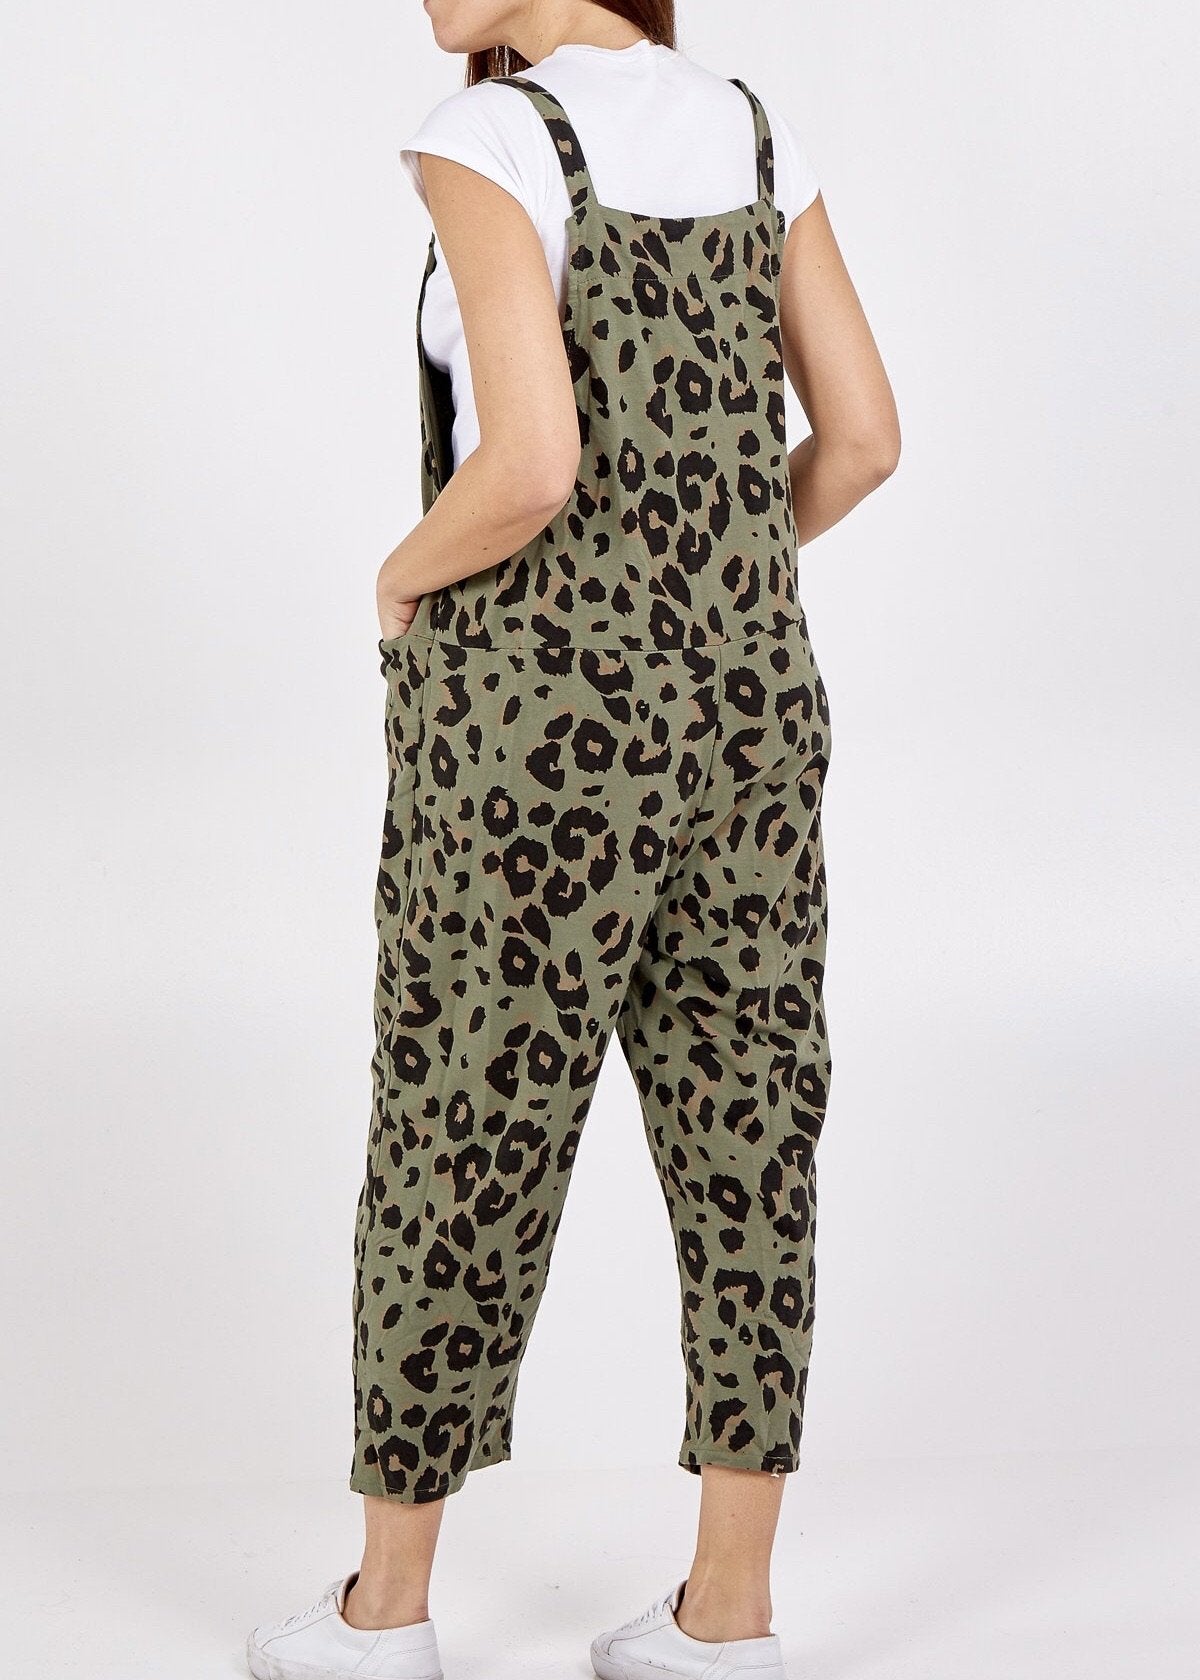 Showing the back of the Porthleven Dungarees in khaki with a leopard print pattern 